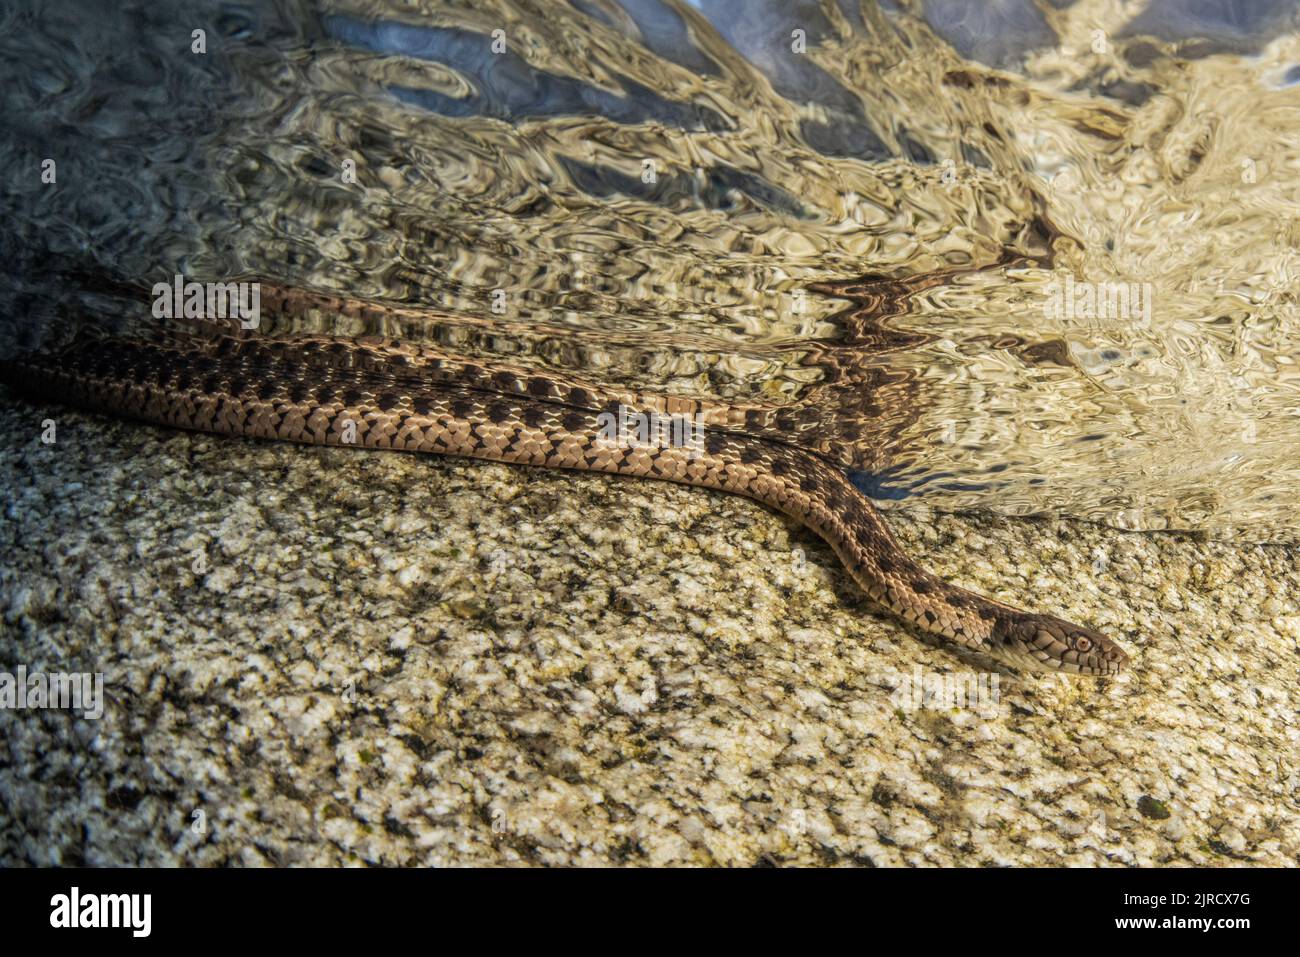 A Sierra gartersnake (Thamnophis couchii), a snake in the pristine water of a mountain river in the Sierra Nevada mountains of California. Stock Photo